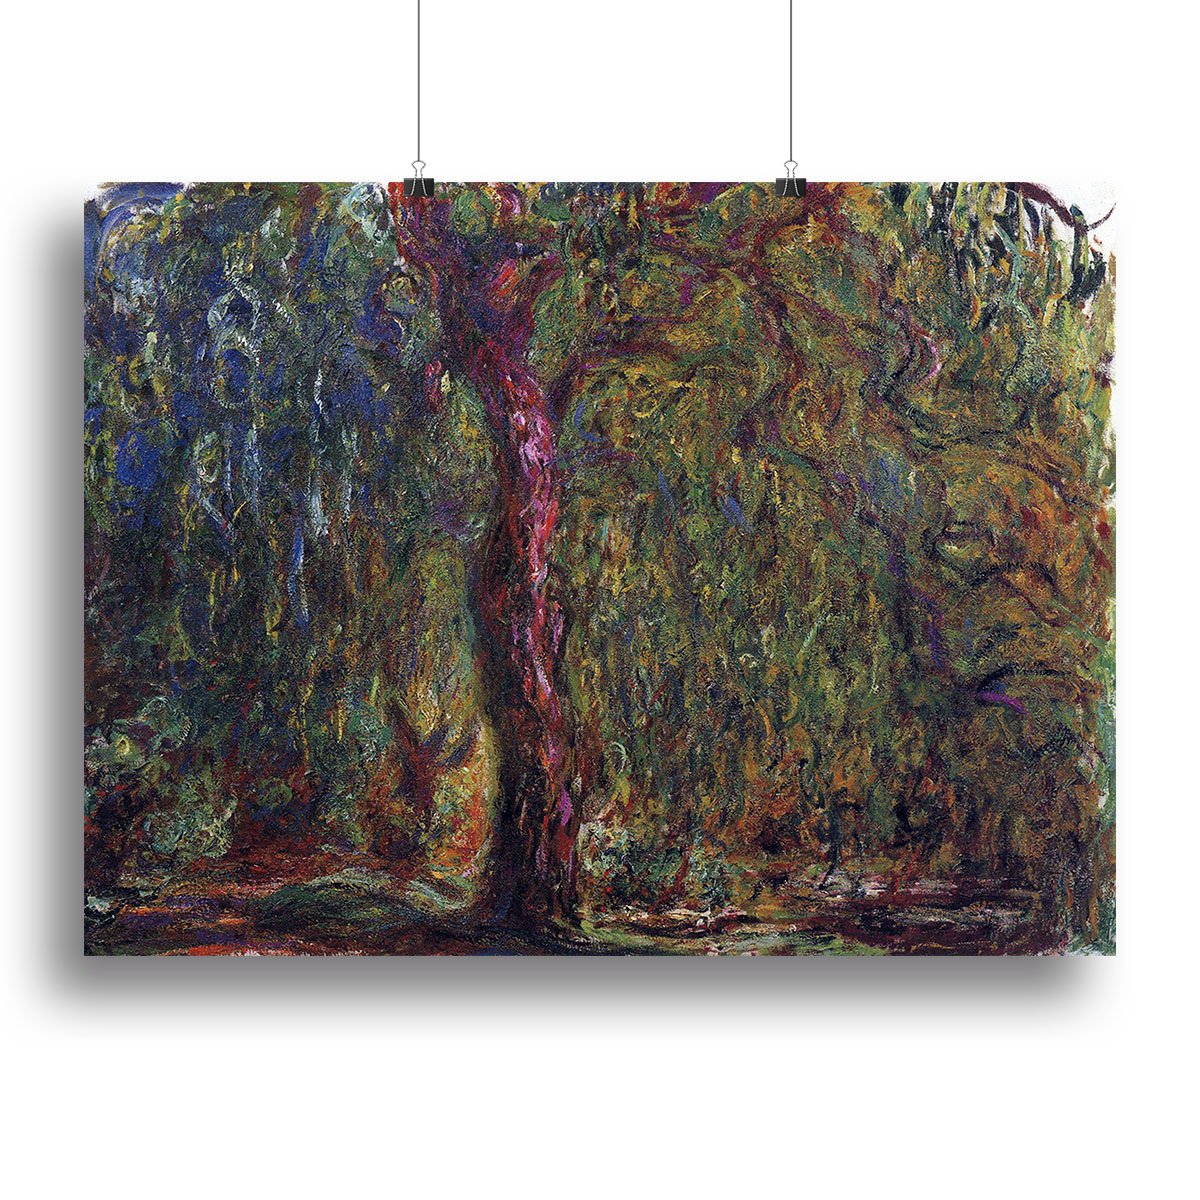 Weeping willow by Monet Canvas Print or Poster